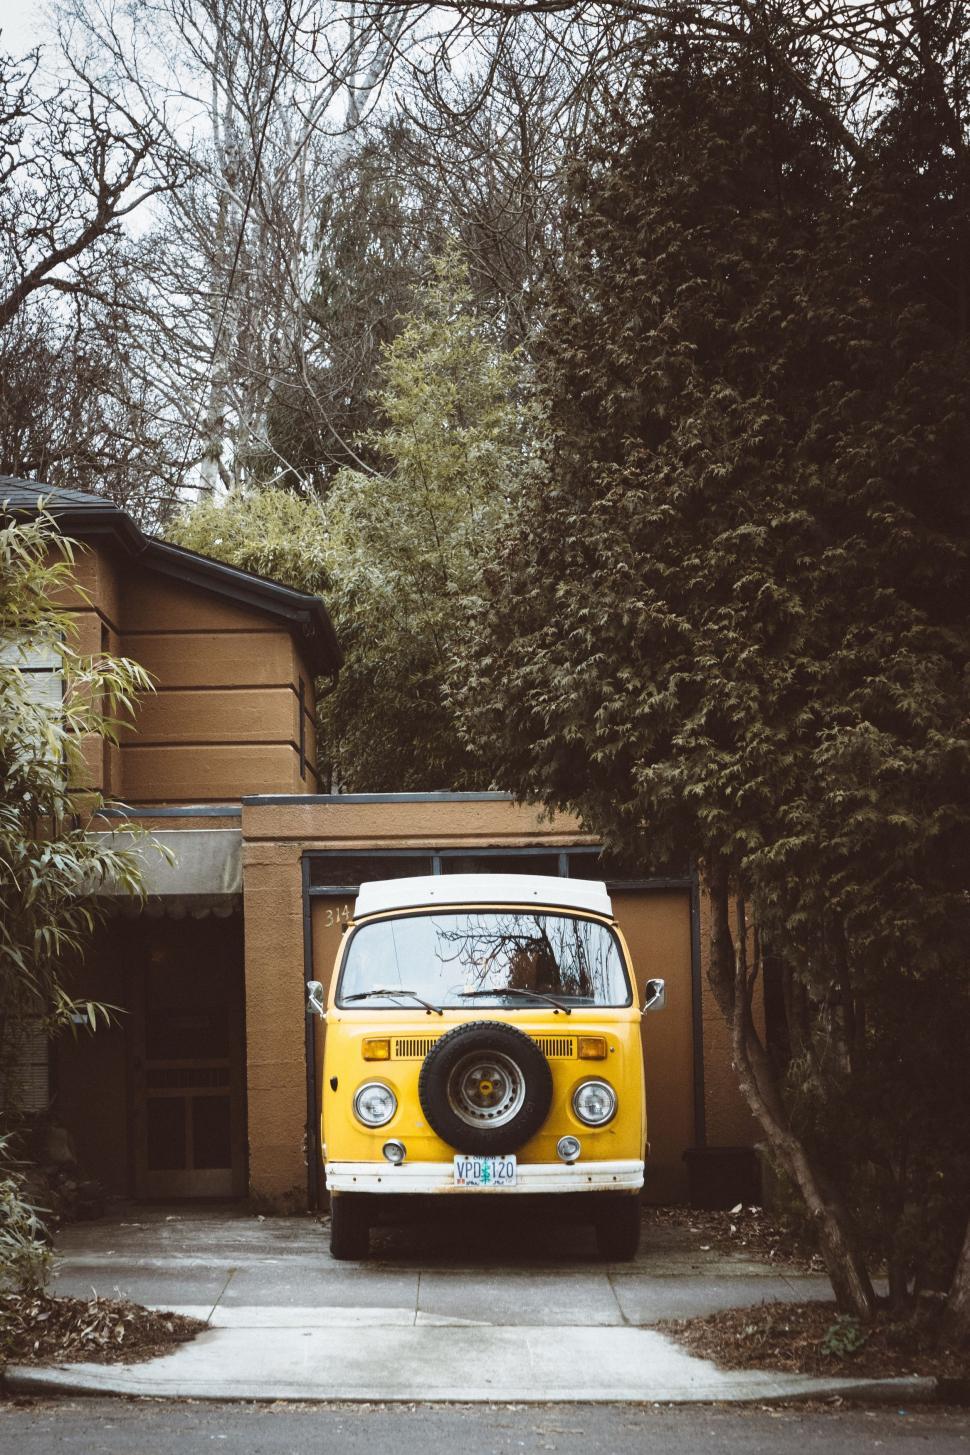 Free Image of Yellow and White Van Parked in Front of House 